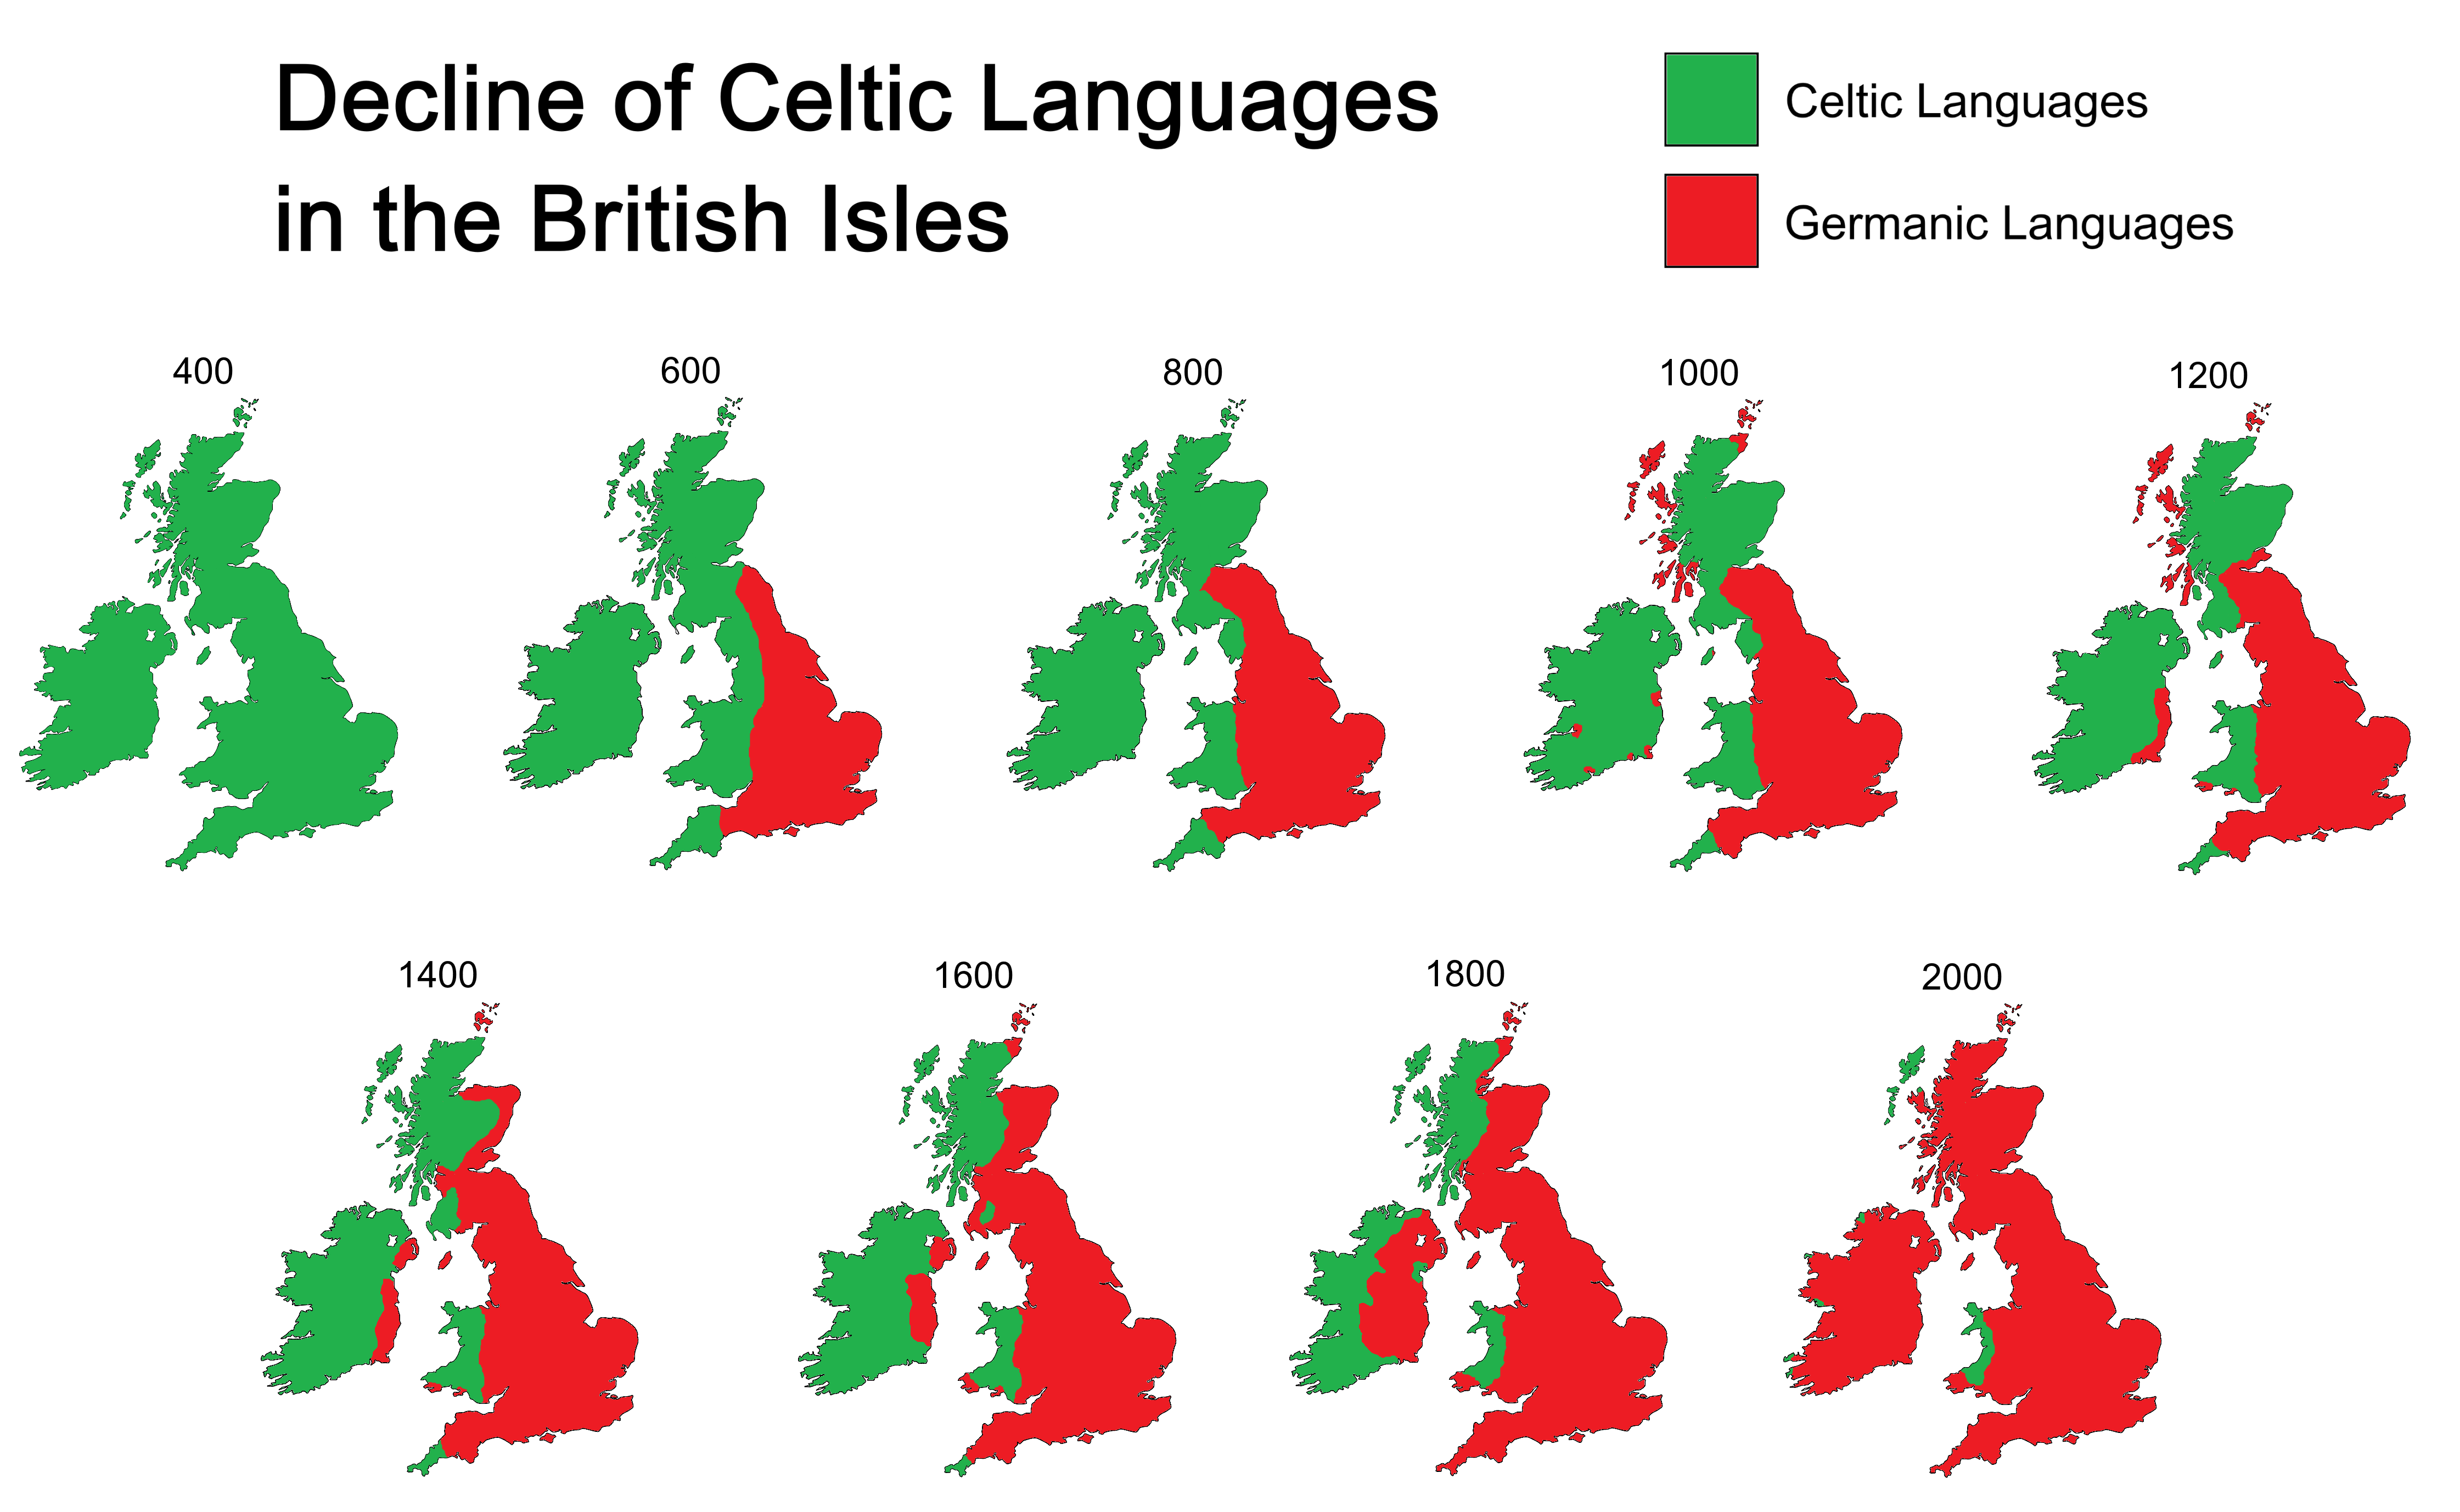 Map of the decline of Celtic languages